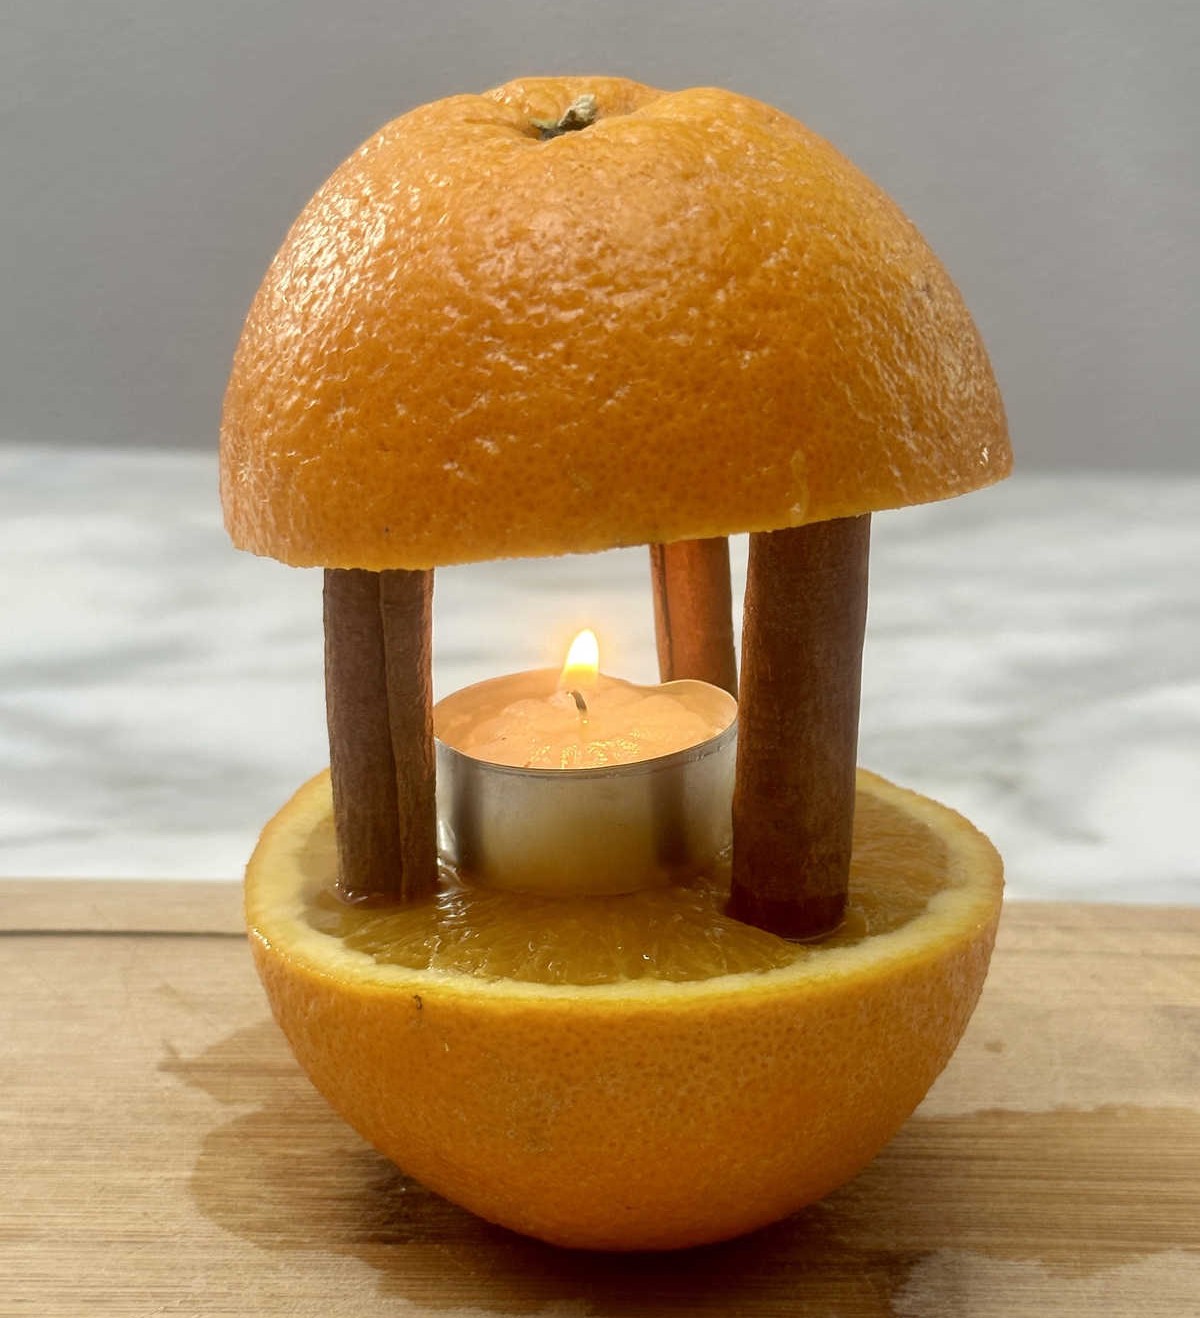 Make an Orange and Cinnamon Candle to Keep Insects Away